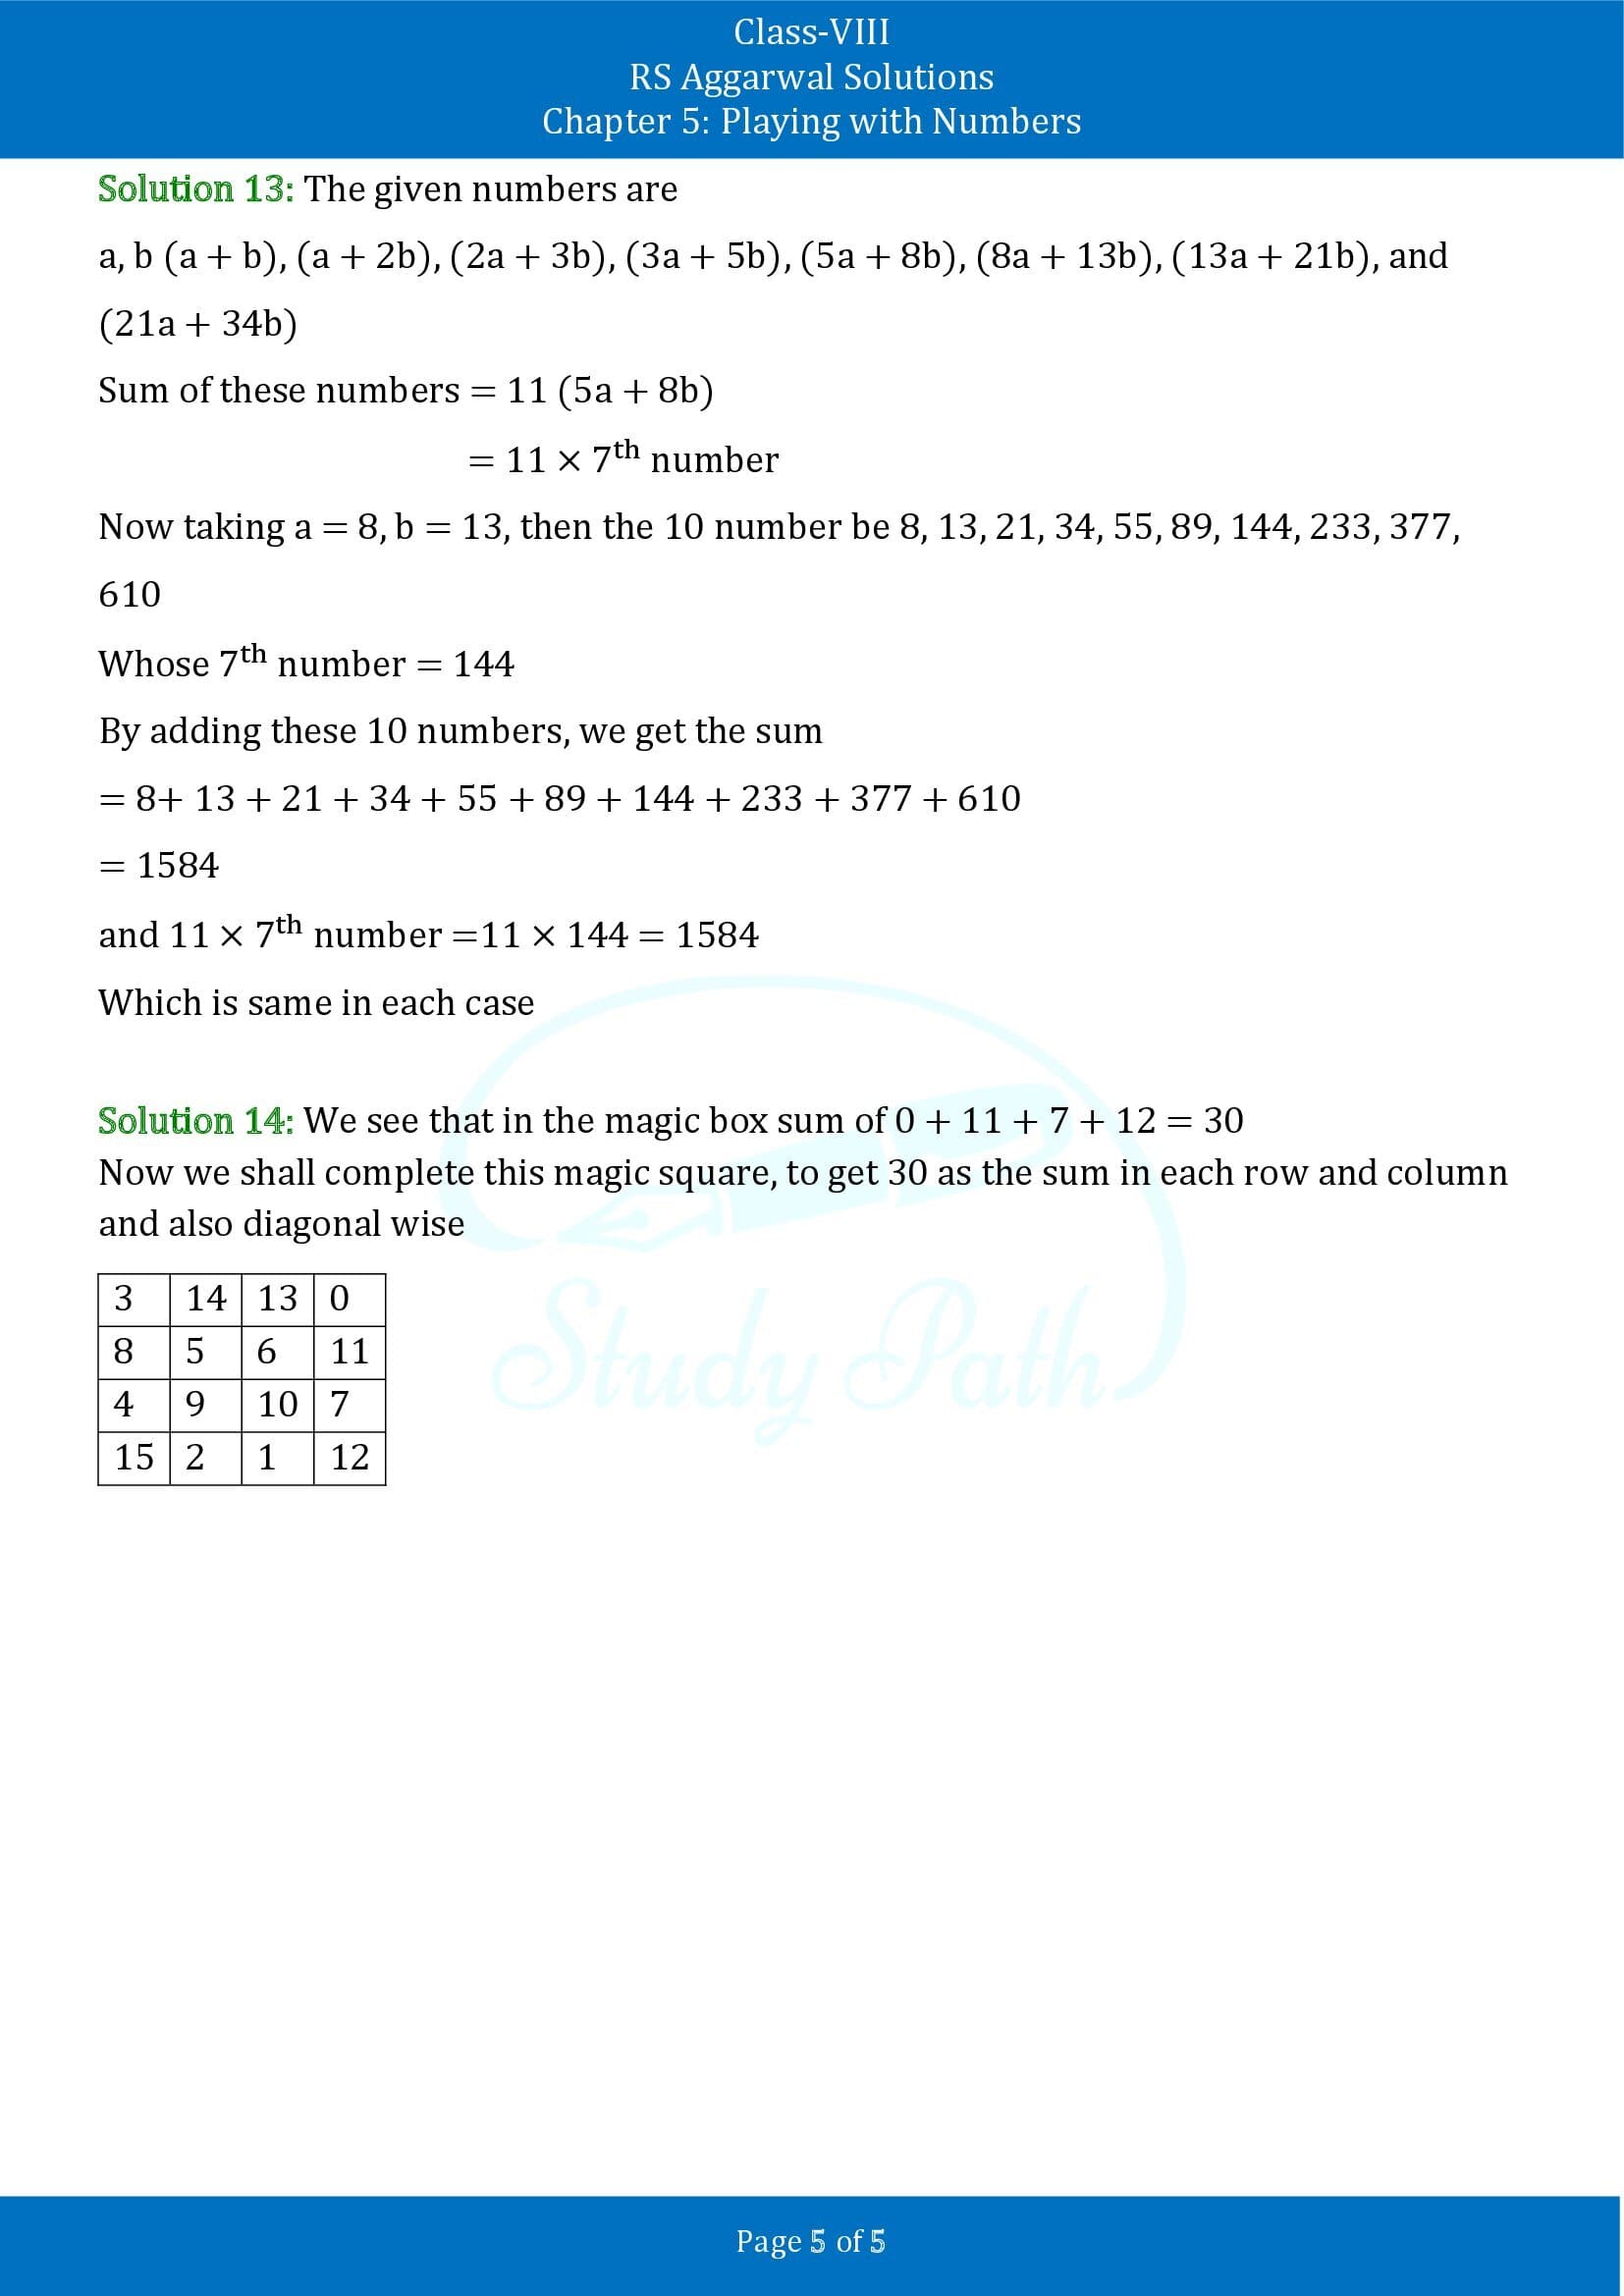 RS Aggarwal Solutions Class 8 Chapter 5 Playing with Numbers Exercise 5C 00005